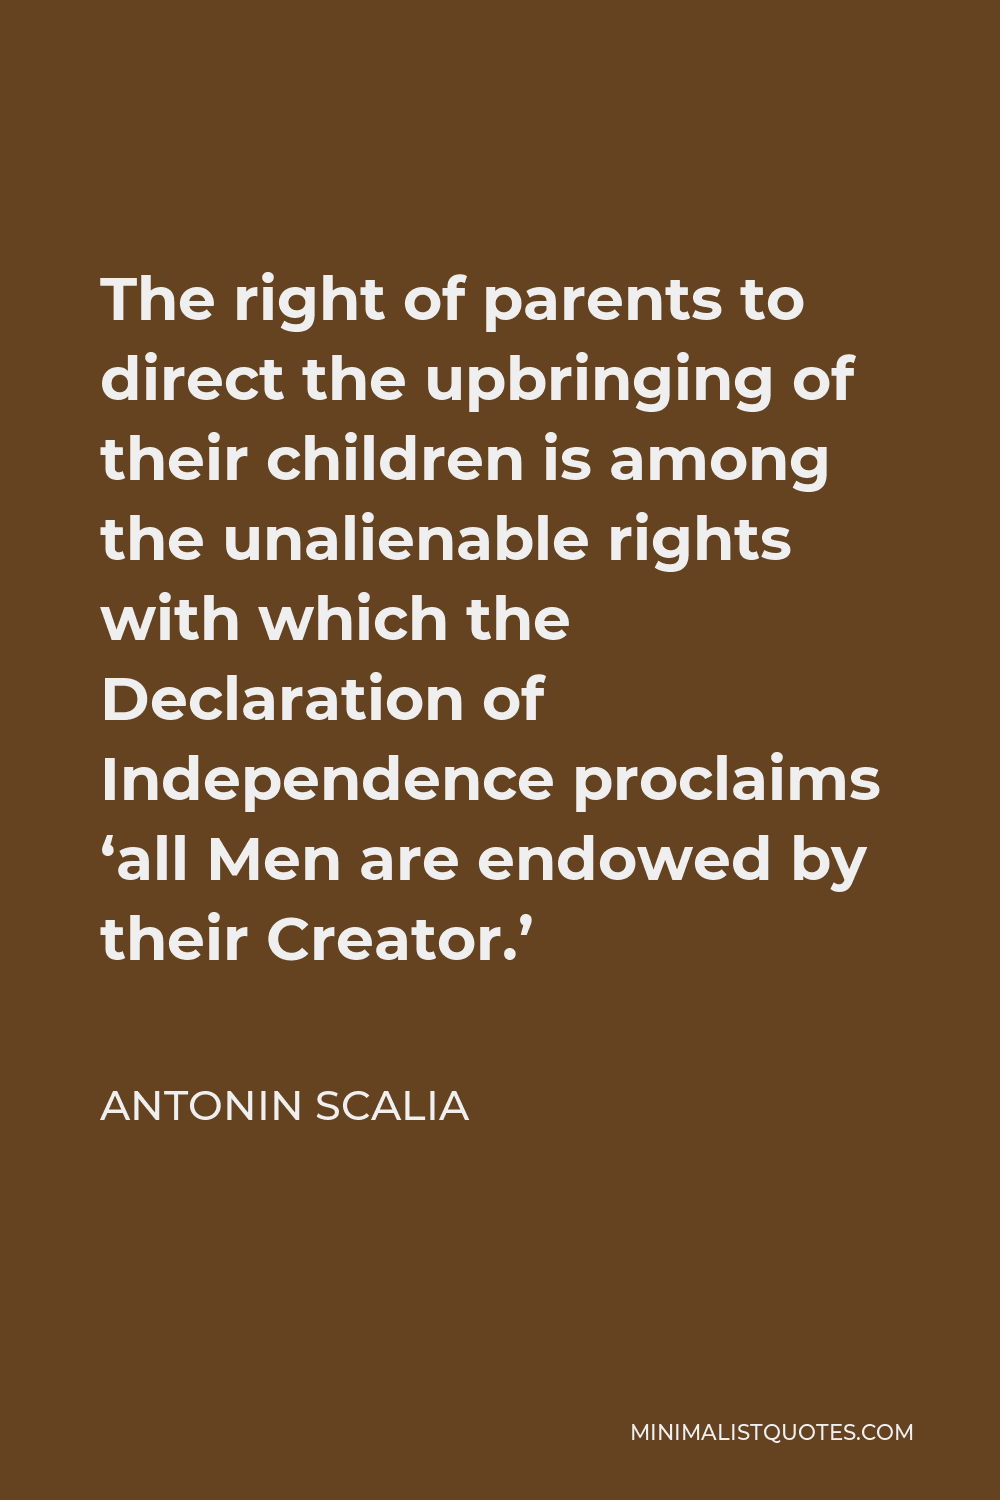 Antonin Scalia Quote - The right of parents to direct the upbringing of their children is among the unalienable rights with which the Declaration of Independence proclaims ‘all Men are endowed by their Creator.’